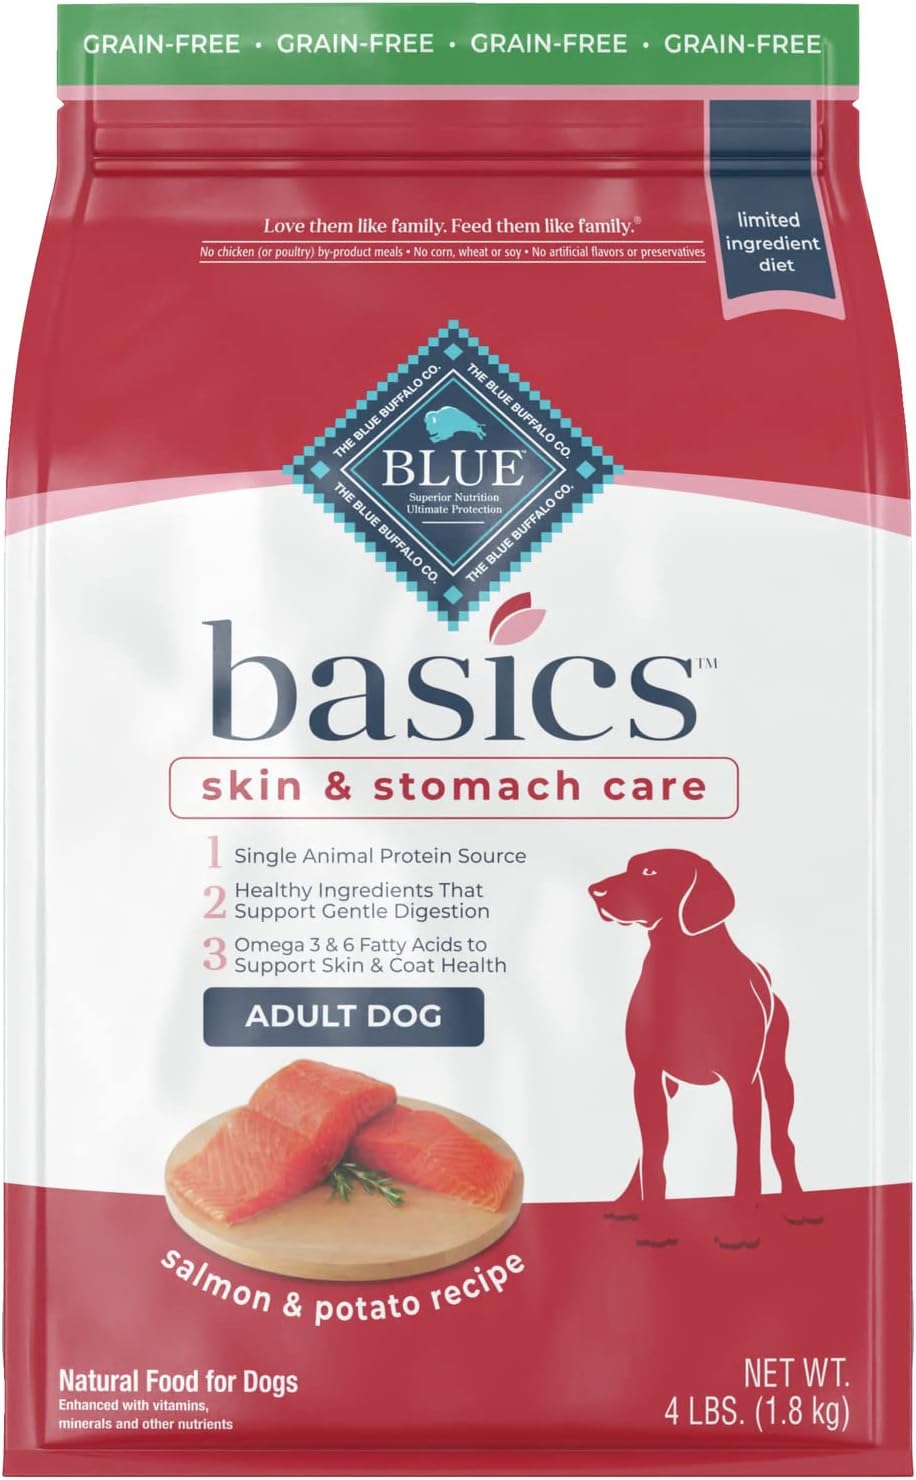 Blue Basics Limited Ingredient Diet Adult Grain-Free Salmon and Potato Recipe Dry Dog Food – Gallery Image 1